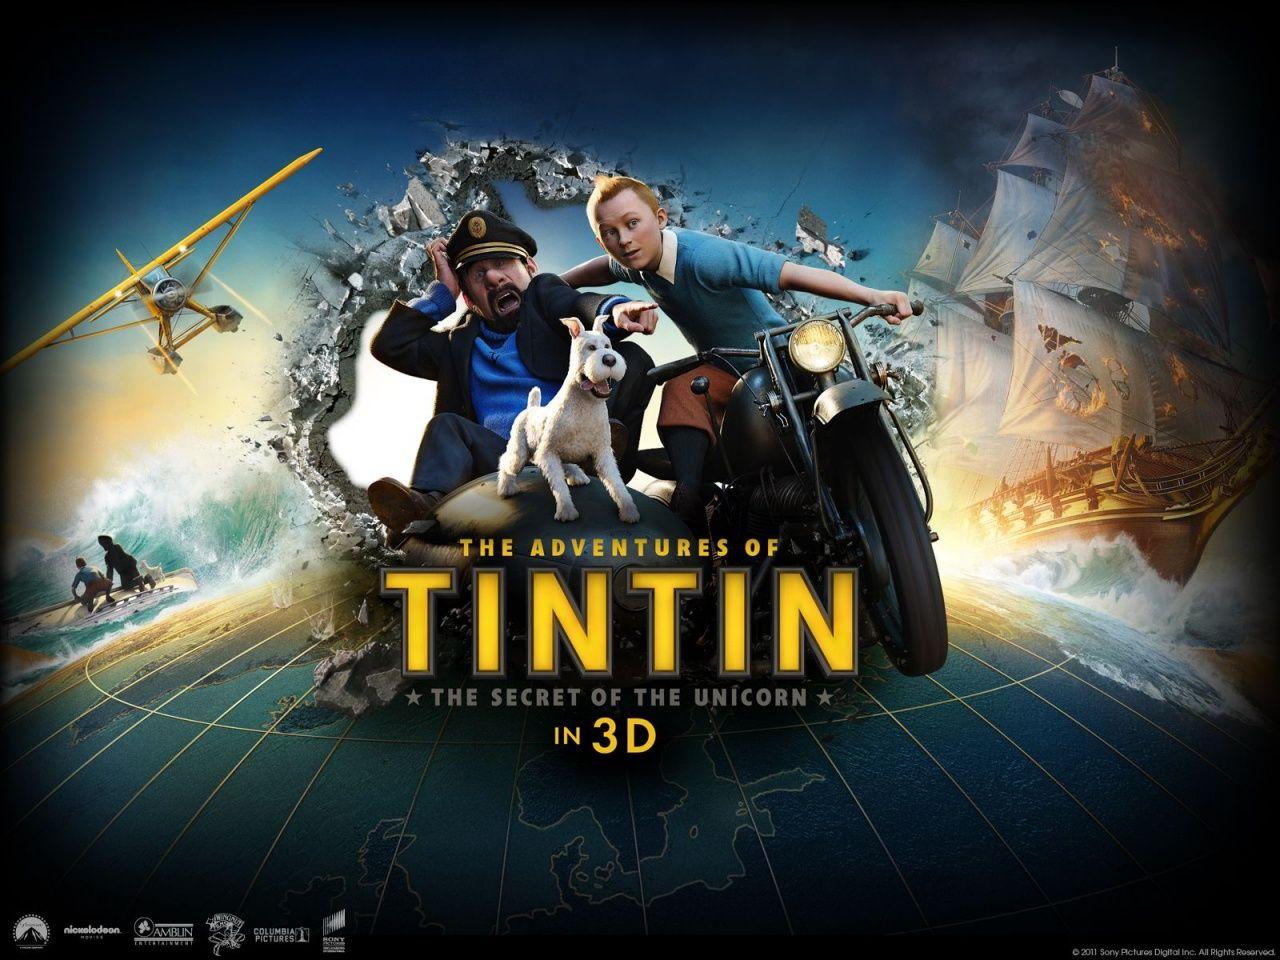 The Adventures of Tintin 3D Wallpaper in jpg format for free download